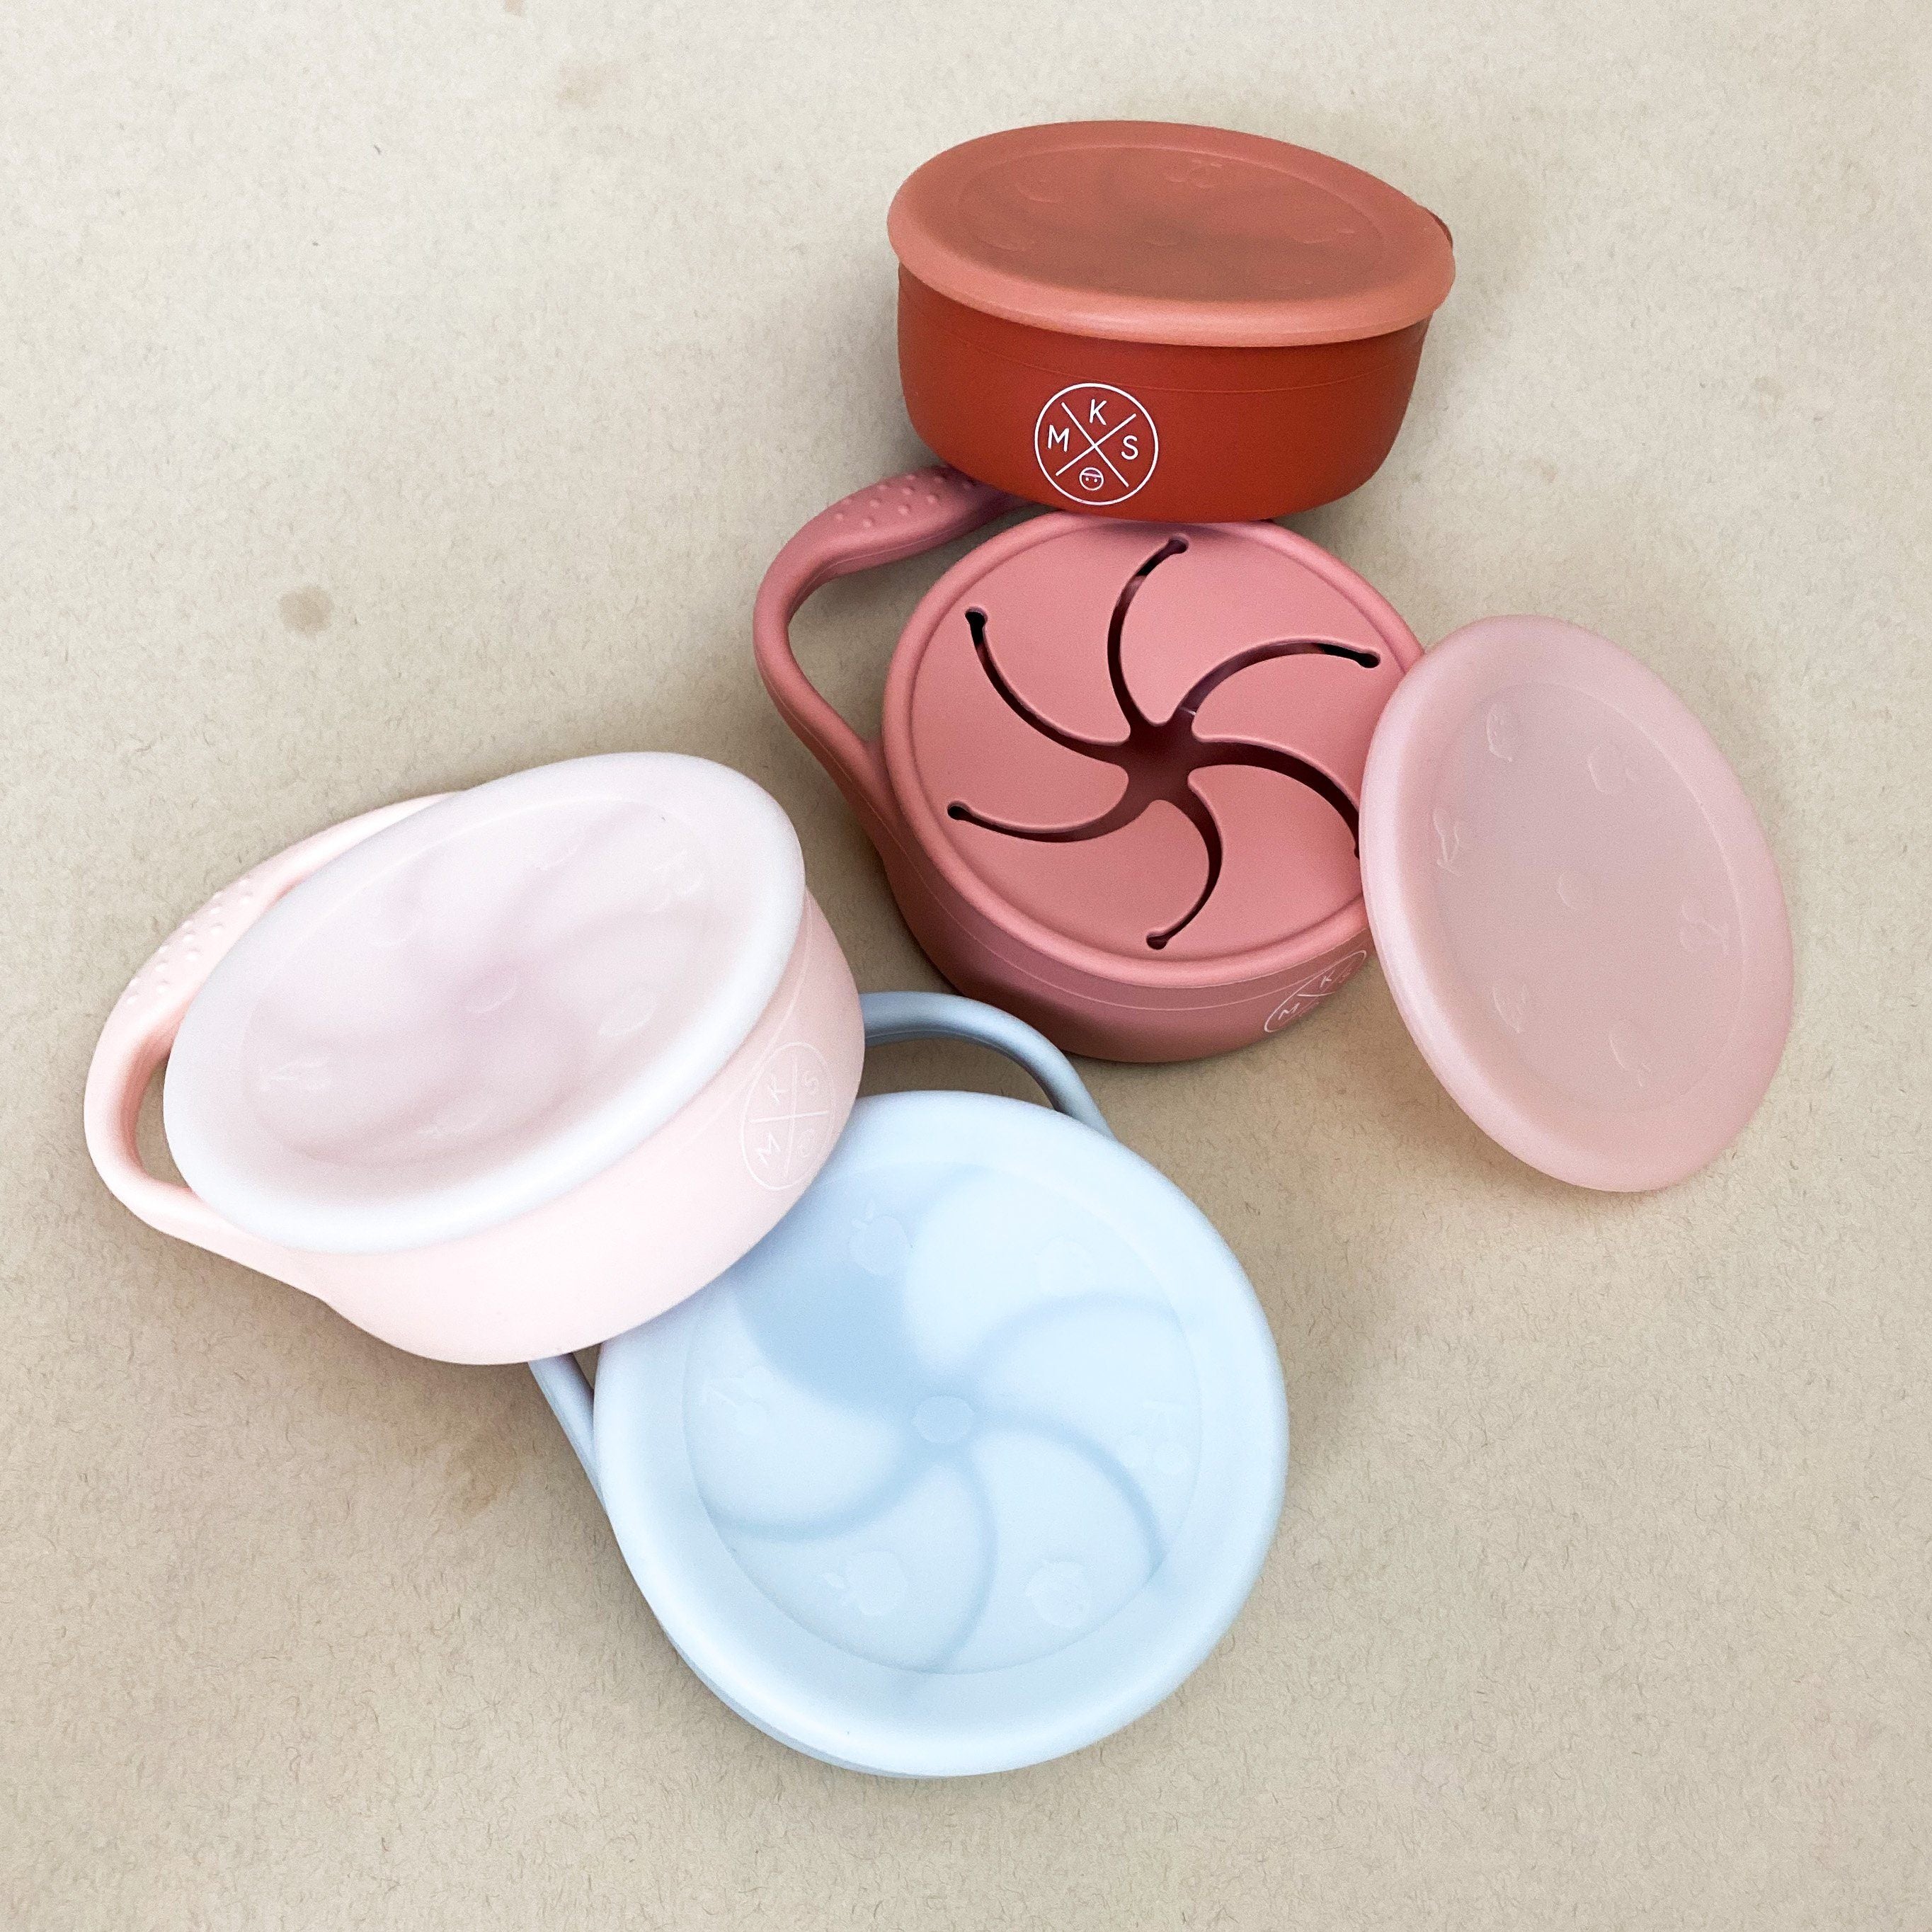  Collapsible Silicone Snack Cup Baby and Toddler by MKS USA